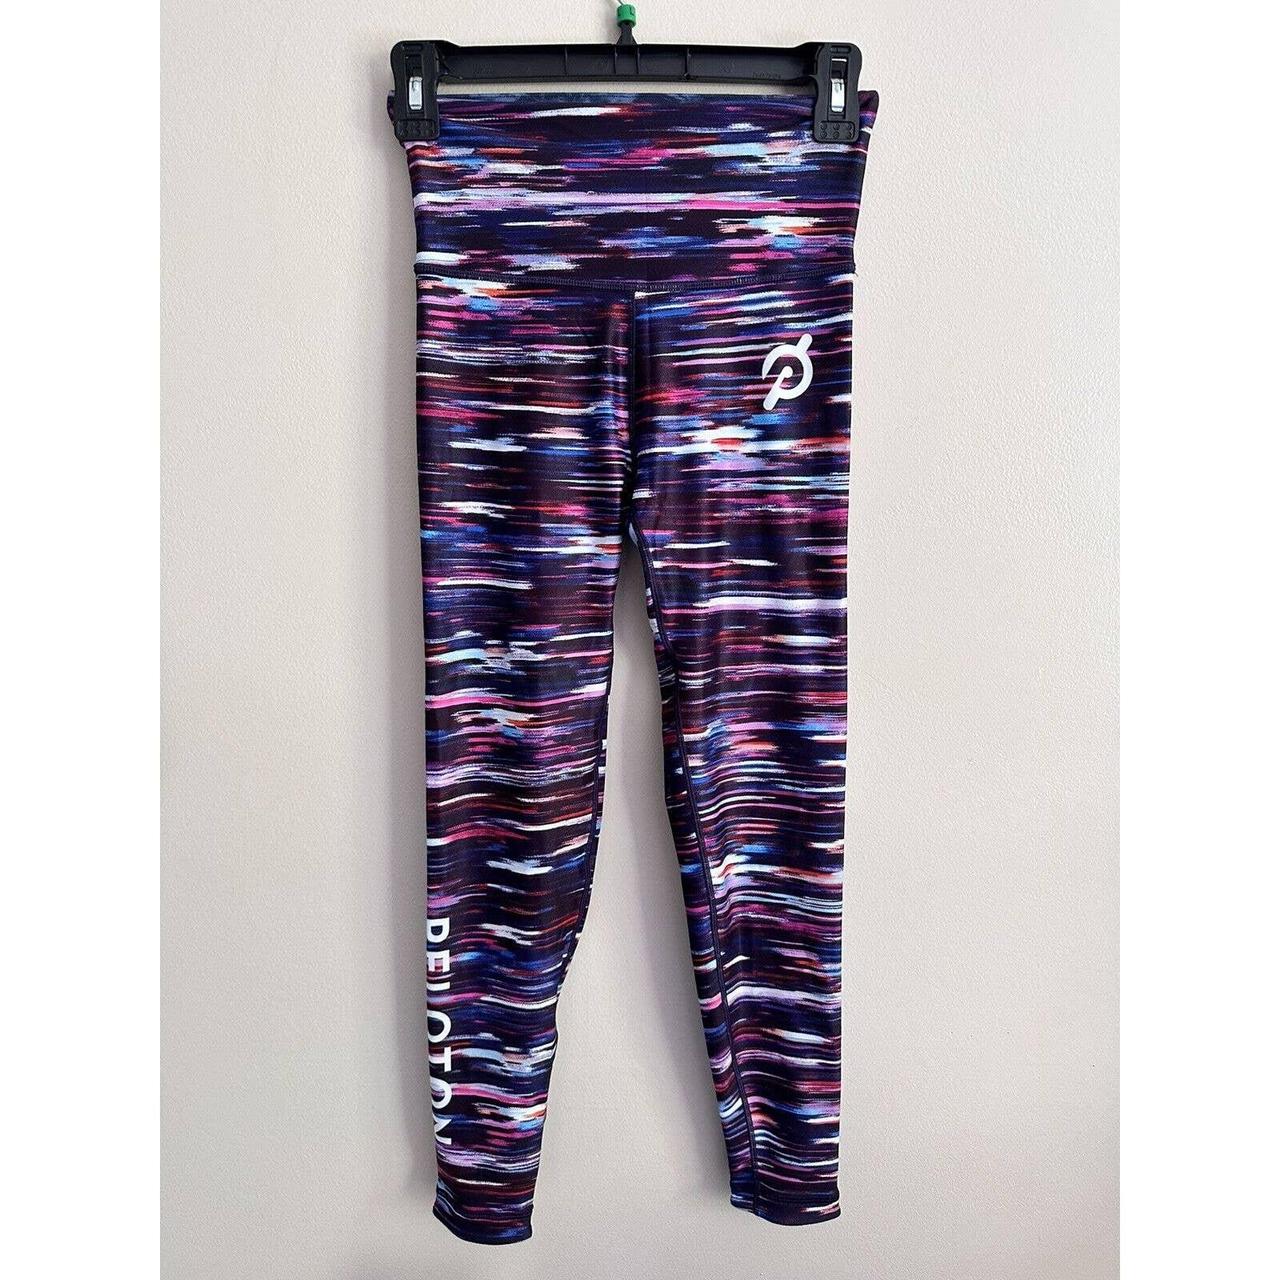 Brand new with tags. Peloton workout leggings and - Depop